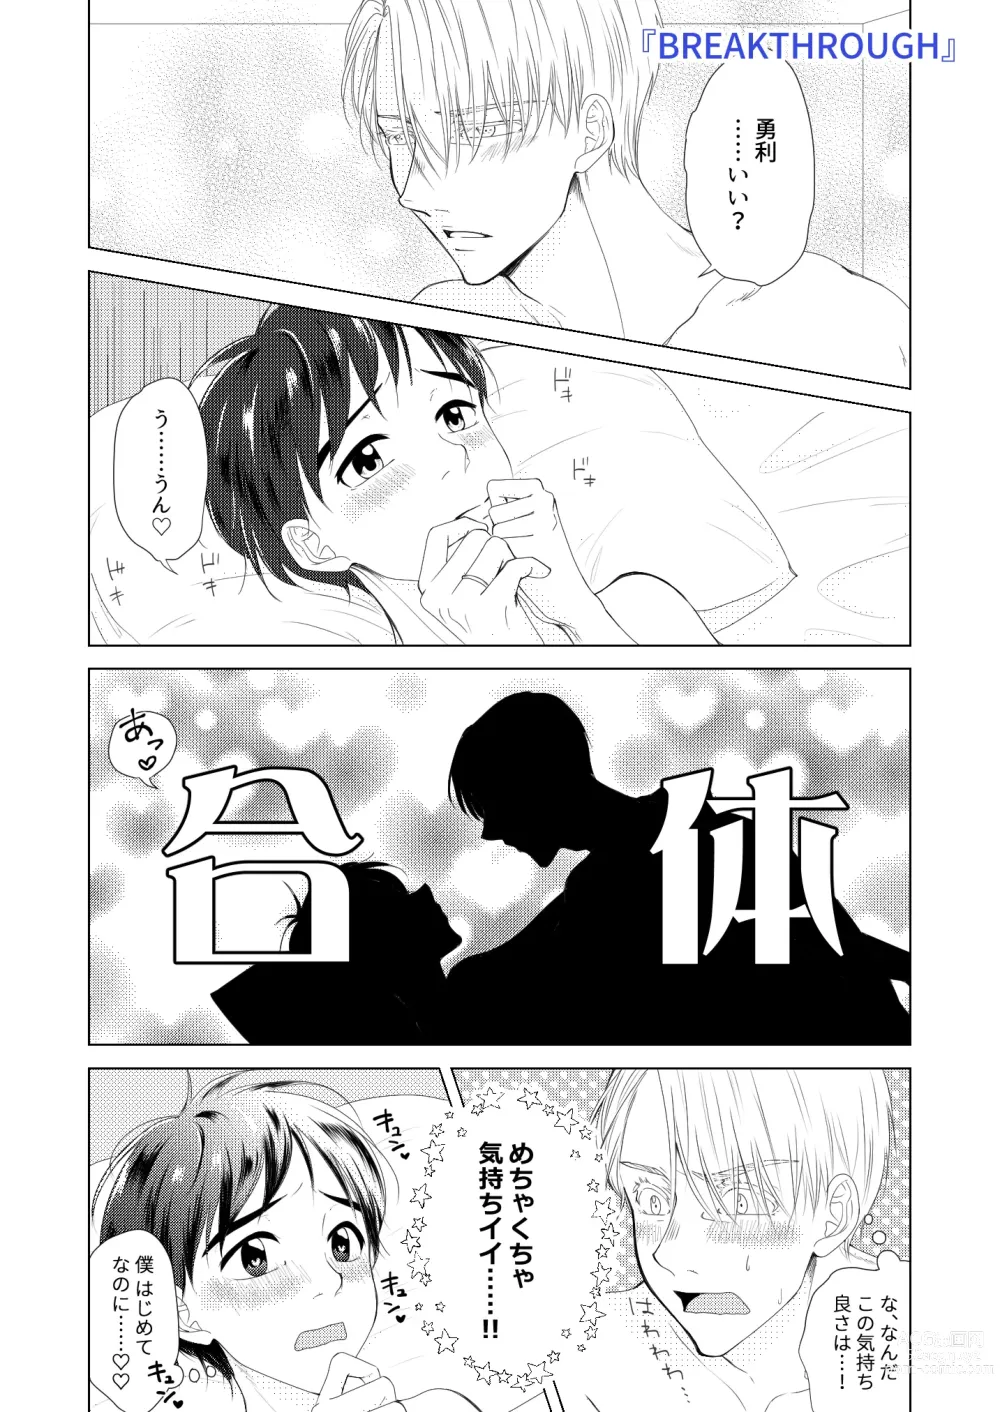 Page 16 of doujinshi Perfect two